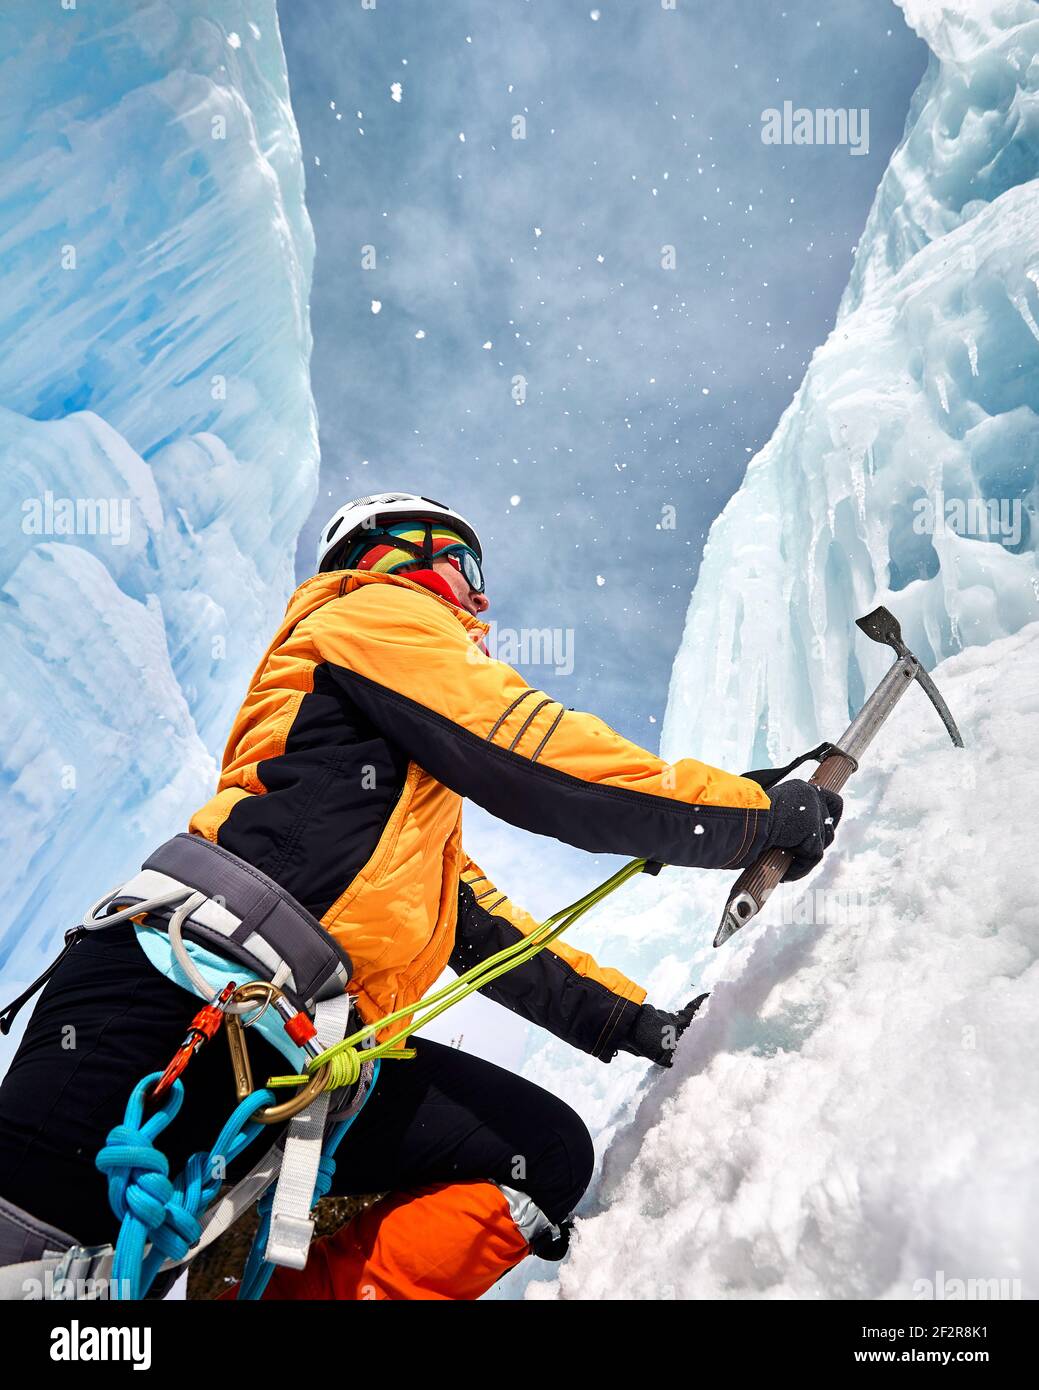 Woman is climbing frozen waterfall with ice axe in orange jacket in the mountains Stock Photo